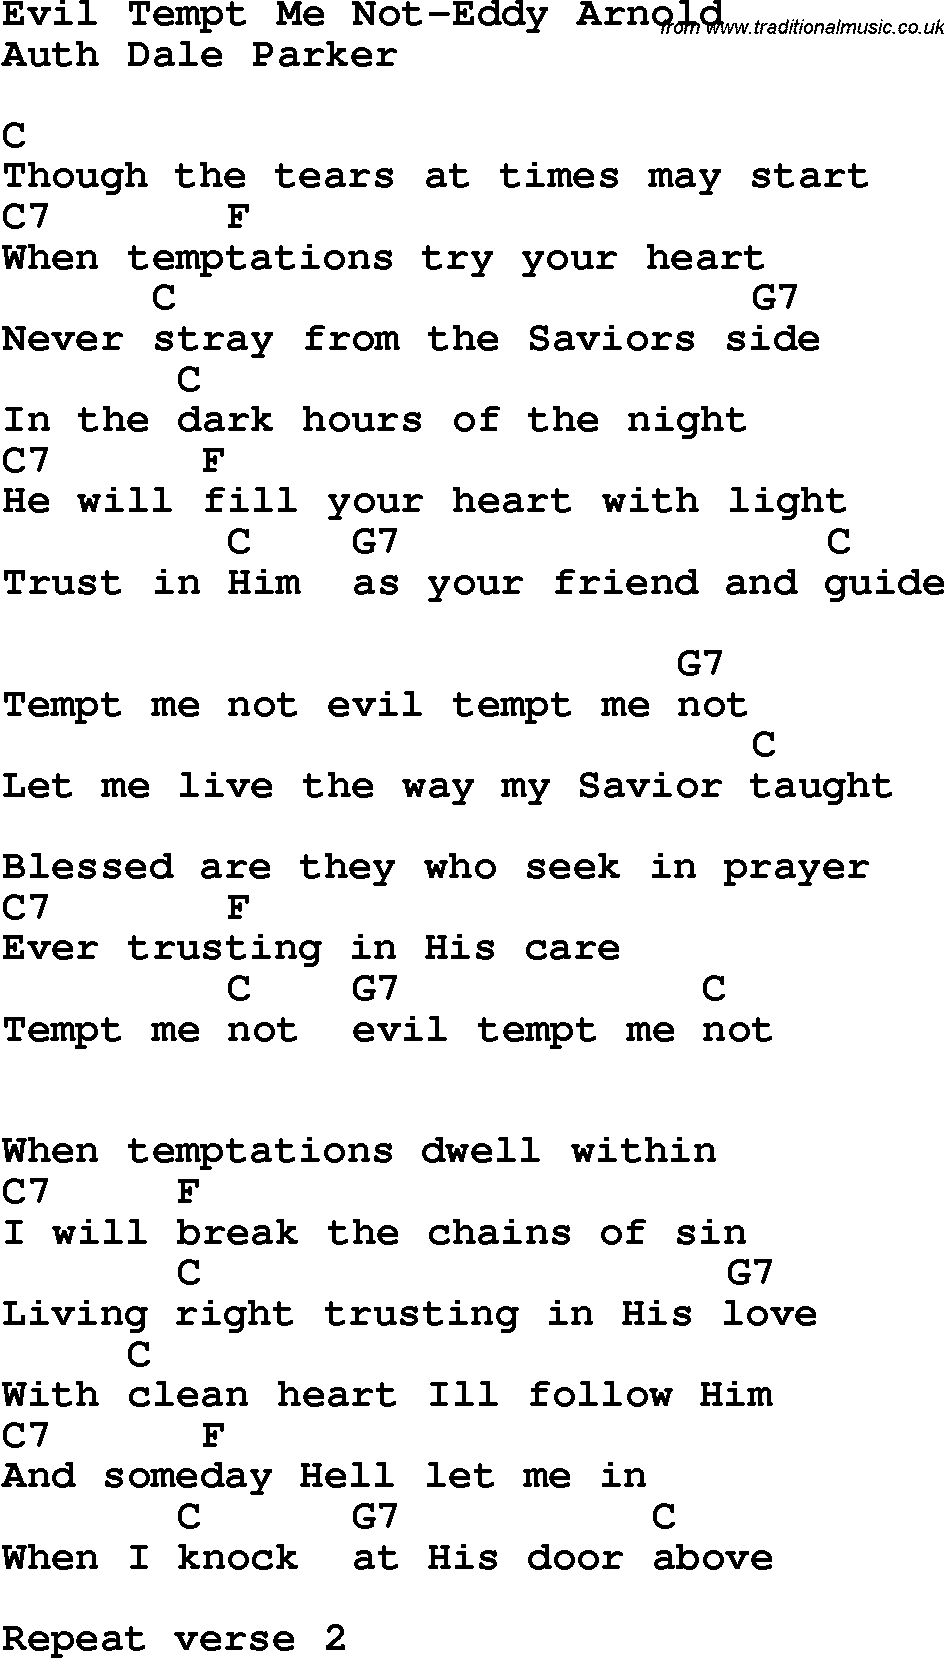 Country, Southern and Bluegrass Gospel Song Evil Tempt Me Not-Eddy Arnold lyrics and chords